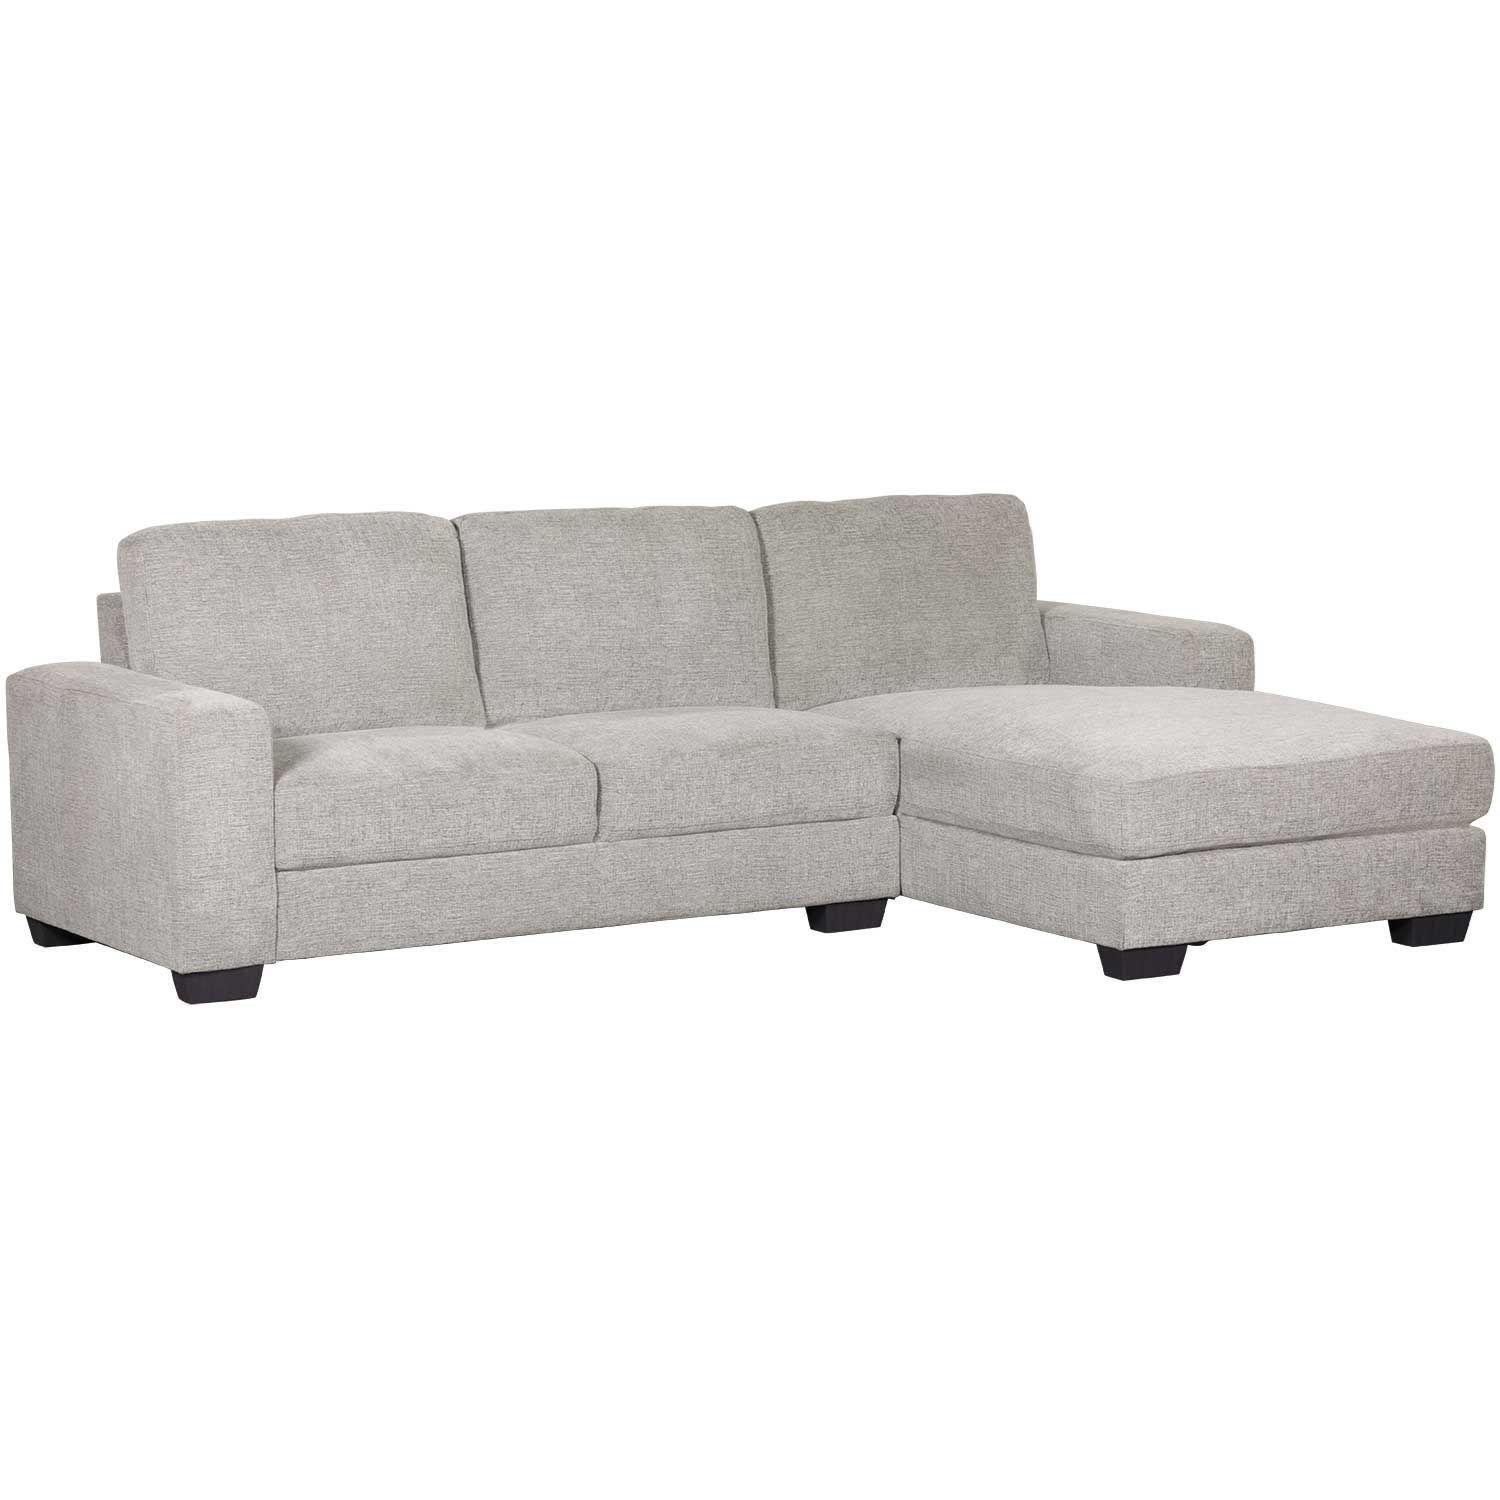 Charleston Dark Gray 2 Piece Sectional | | Lifestyle Inside 2Pc Crowningshield Contemporary Chaise Sofas Light Gray (View 13 of 15)